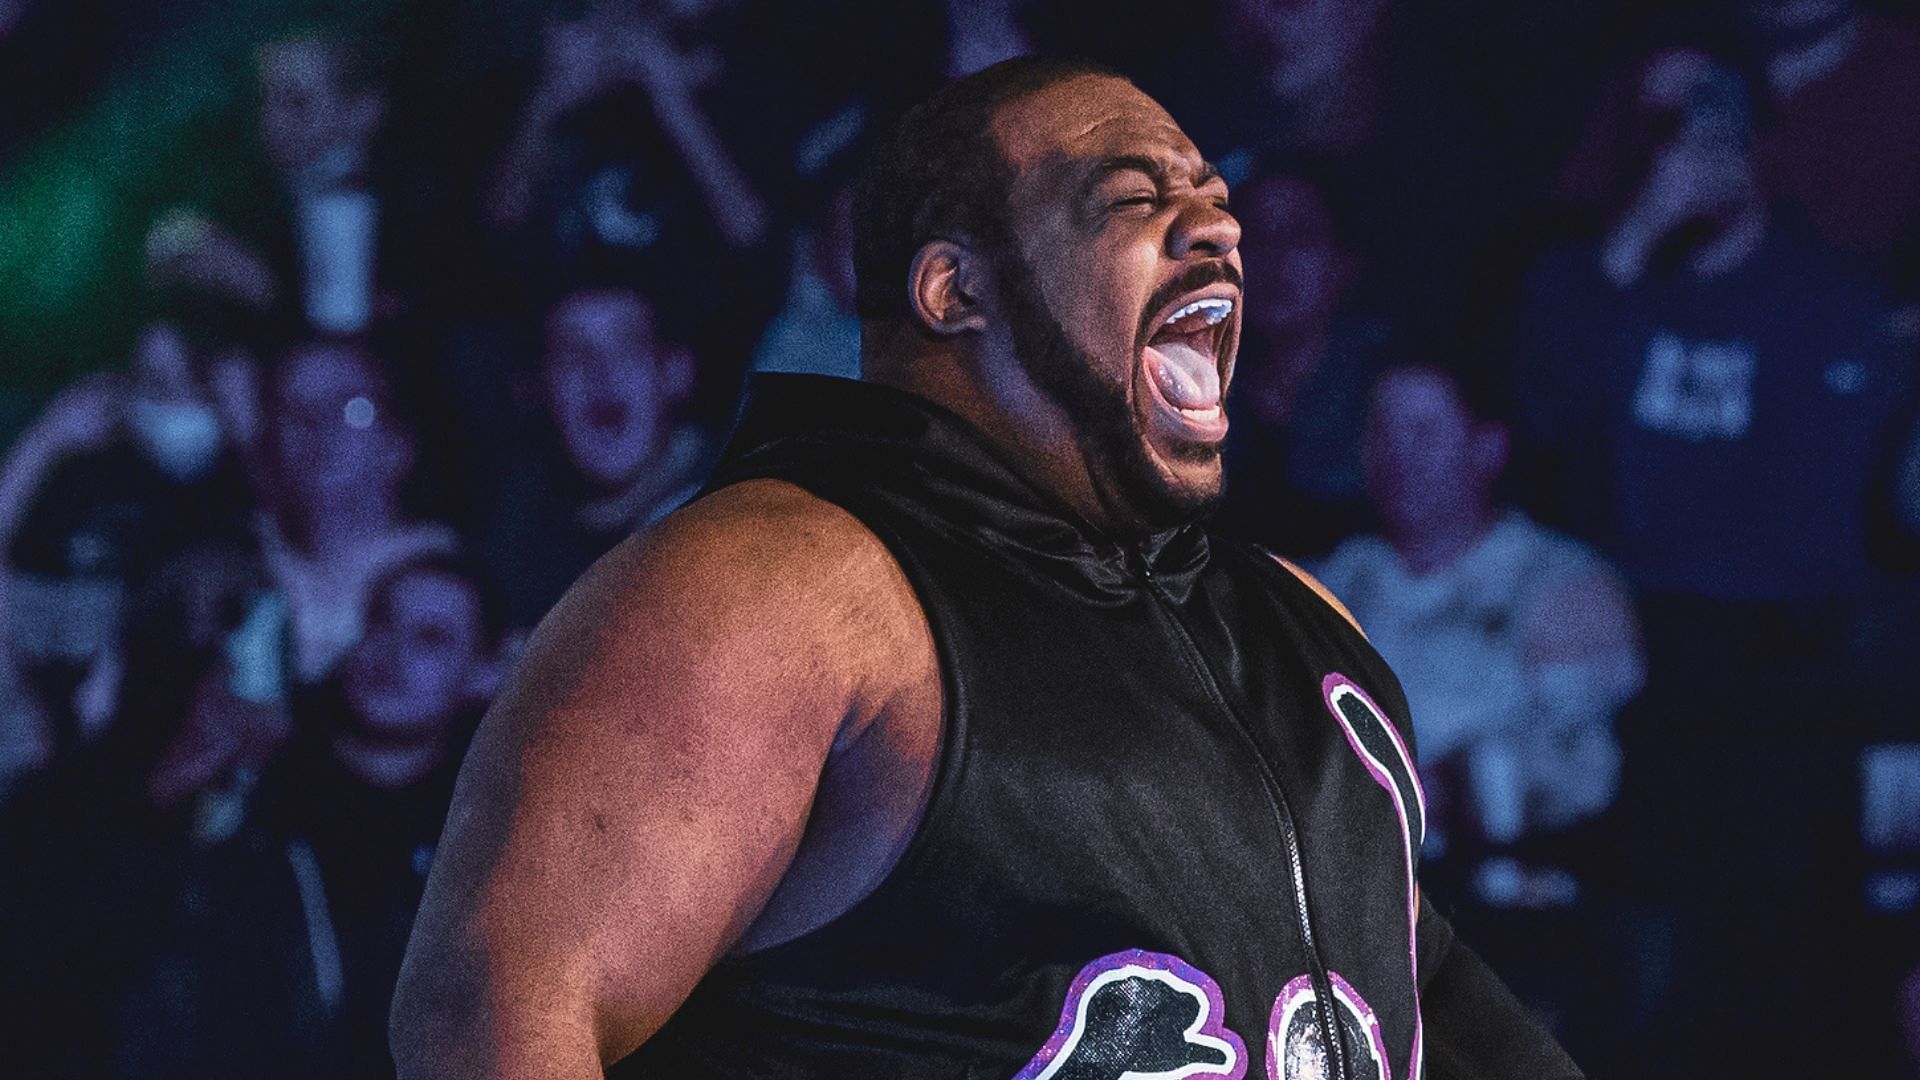 Keith Lee making his AEW debut in 2022 (Credit: jay Lee Photography)